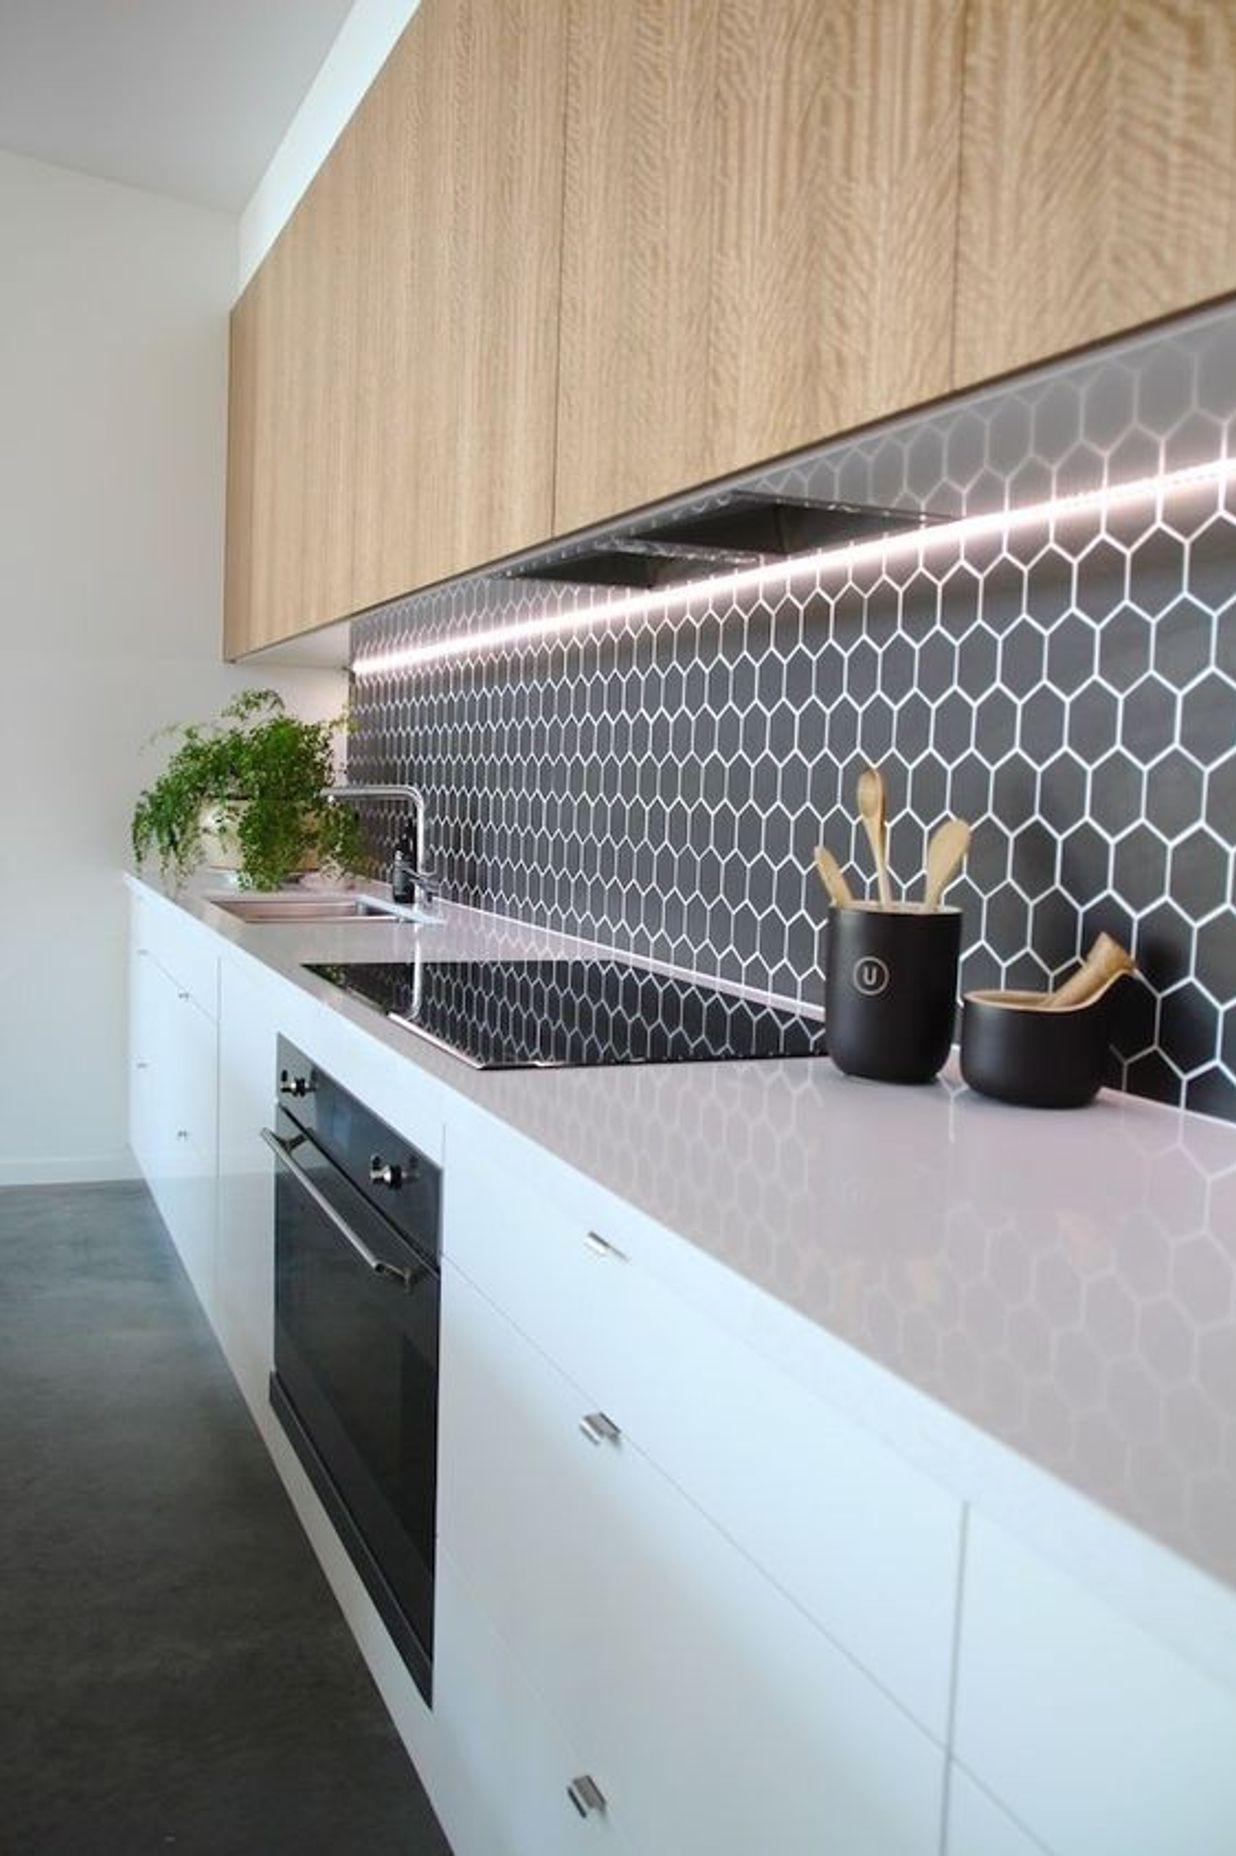 Hexagonal tiles add a retro element to your kitchen design. The surface is still very smooth and the grouting has been sealed to make cleaning easy. (Tile Depot 2021)